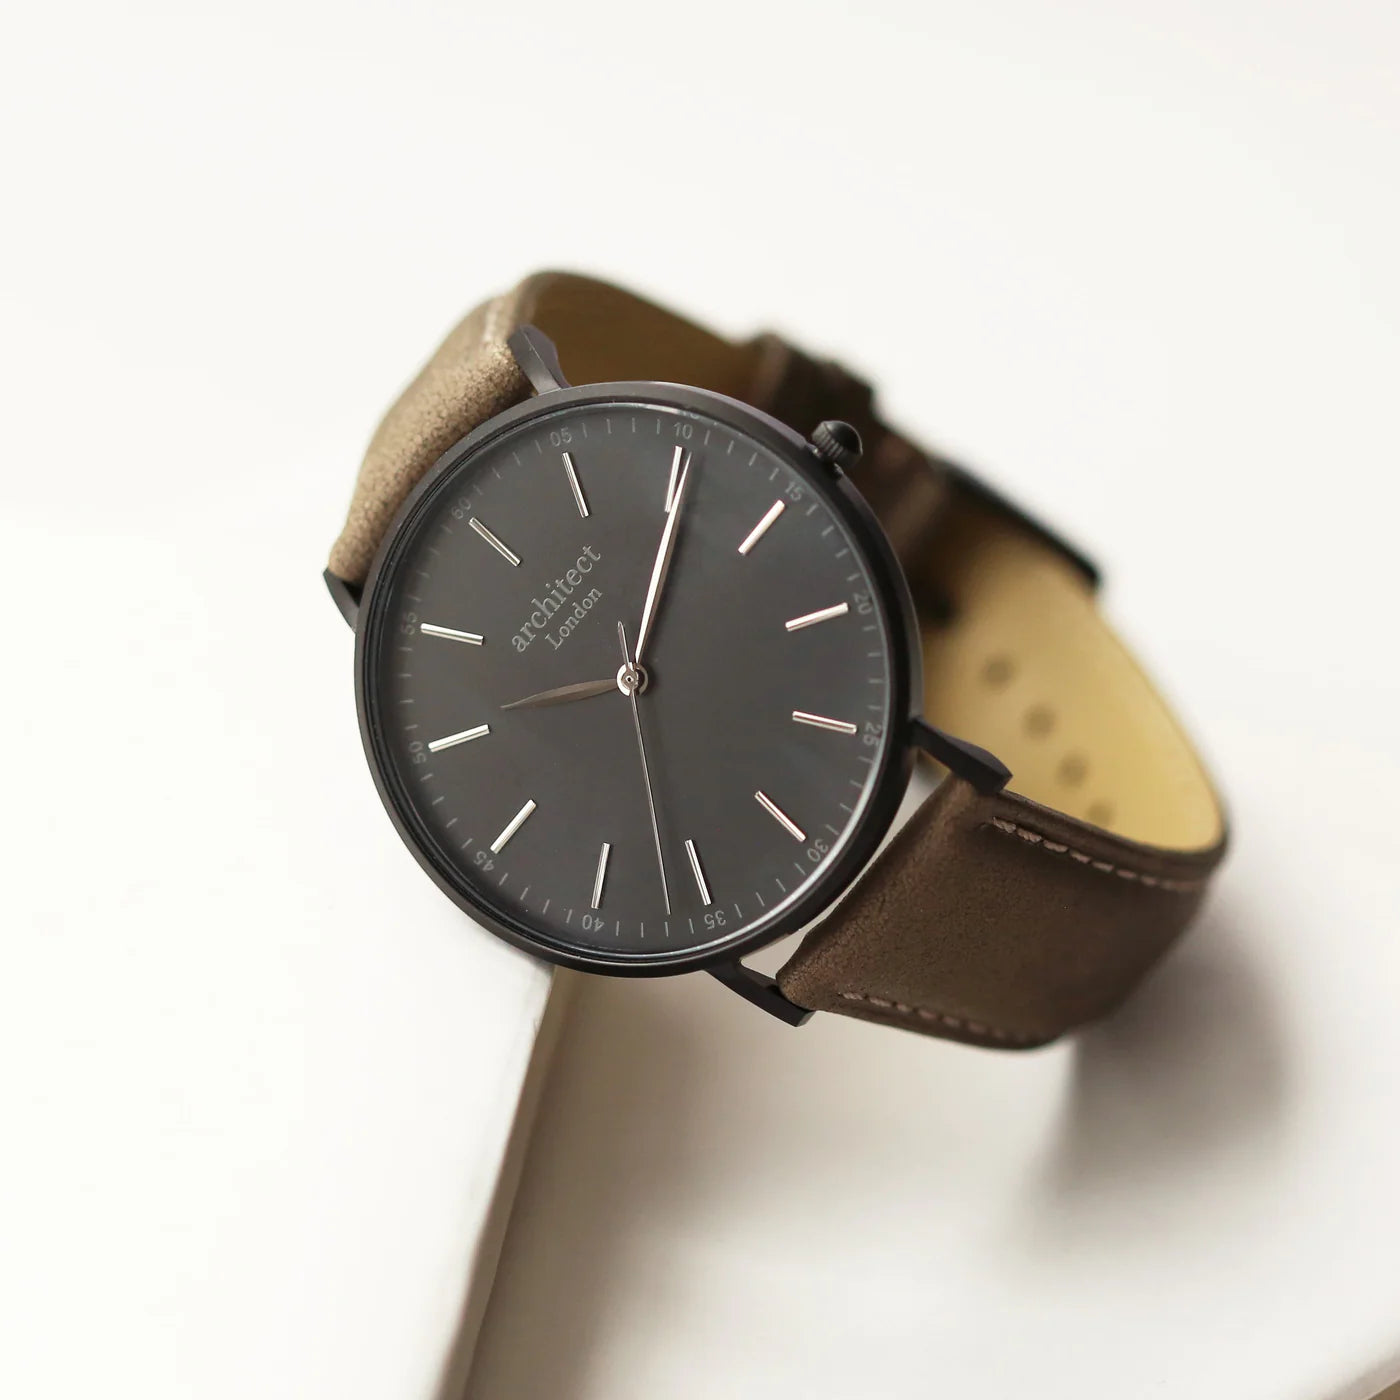 Image of a men's Architect watch with a black face and urban grey leather strap. The back of the watch can be engraved with your own handwritten name or message.